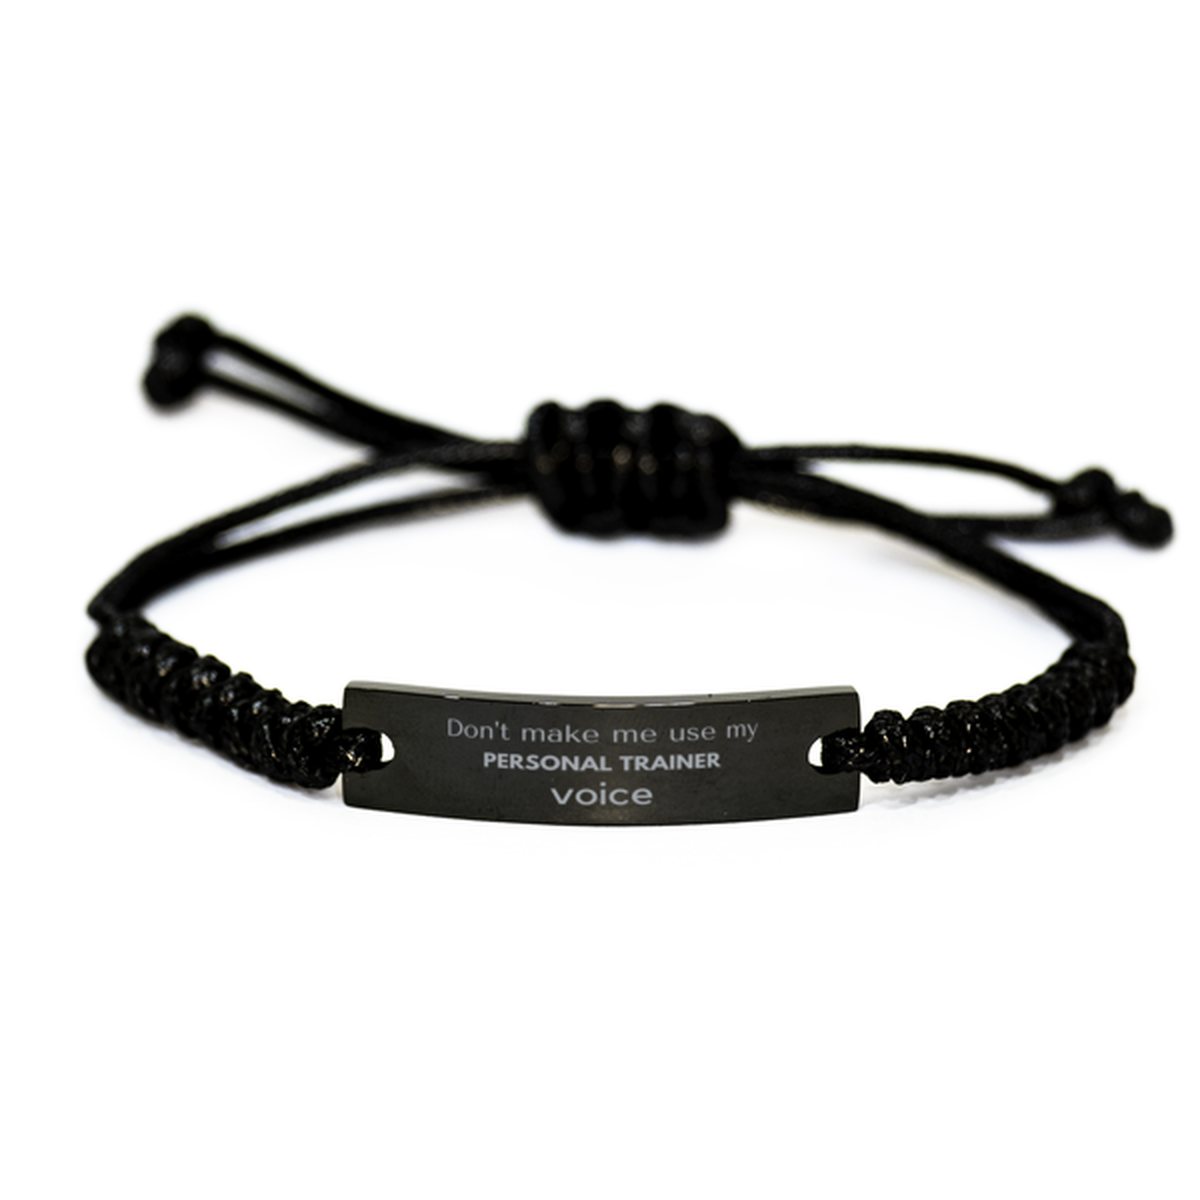 Don't make me use my Personal Trainer voice, Sarcasm Personal Trainer Gifts, Christmas Personal Trainer Black Rope Bracelet Birthday Unique Gifts For Personal Trainer Coworkers, Men, Women, Colleague, Friends